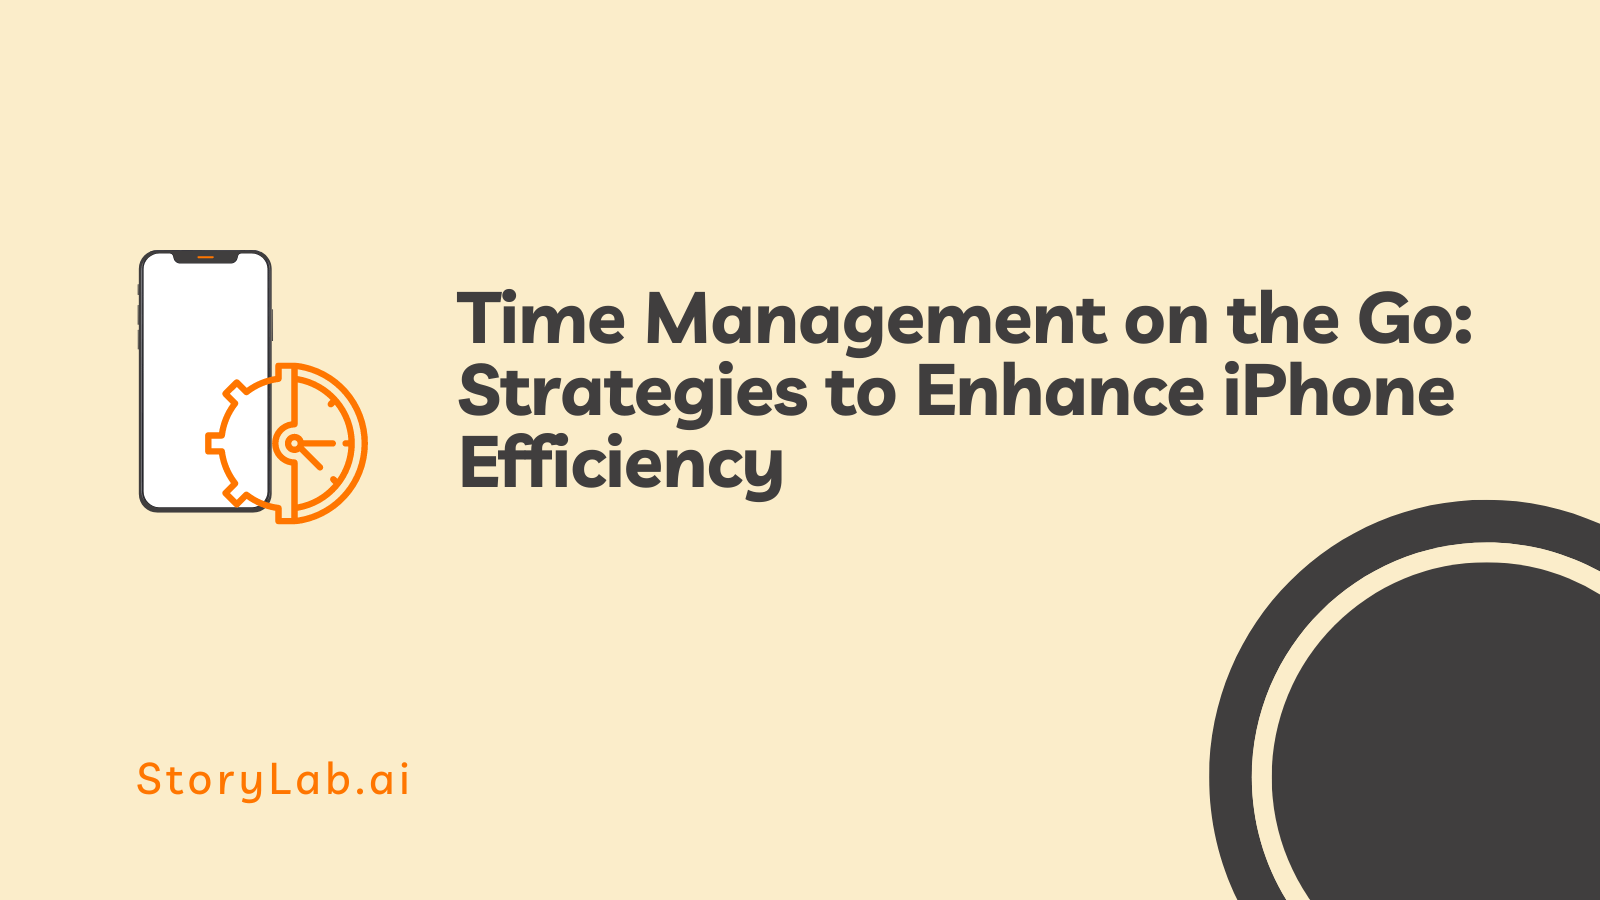 Time Management on the Go Strategies to Enhance iPhone Efficiency